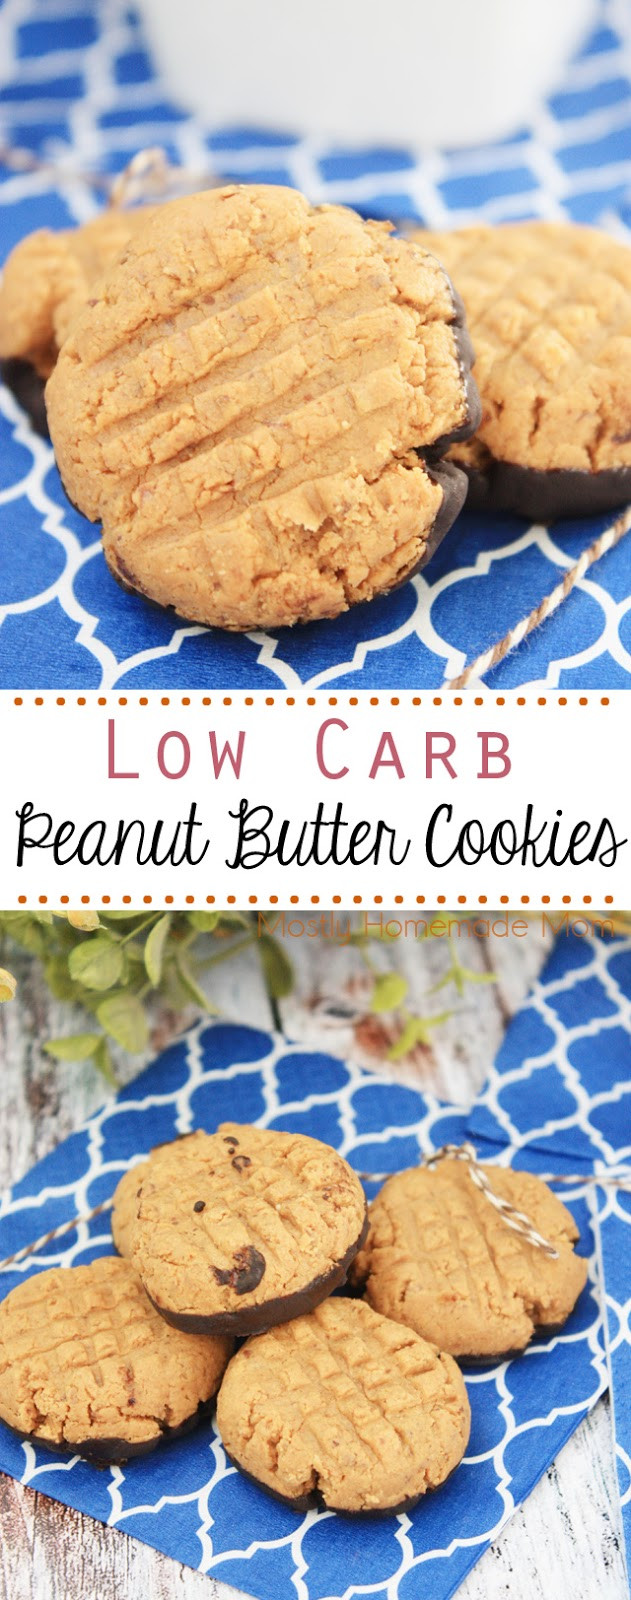 Low Carb Peanut Butter Cookies
 Low Carb Peanut Butter Cookies